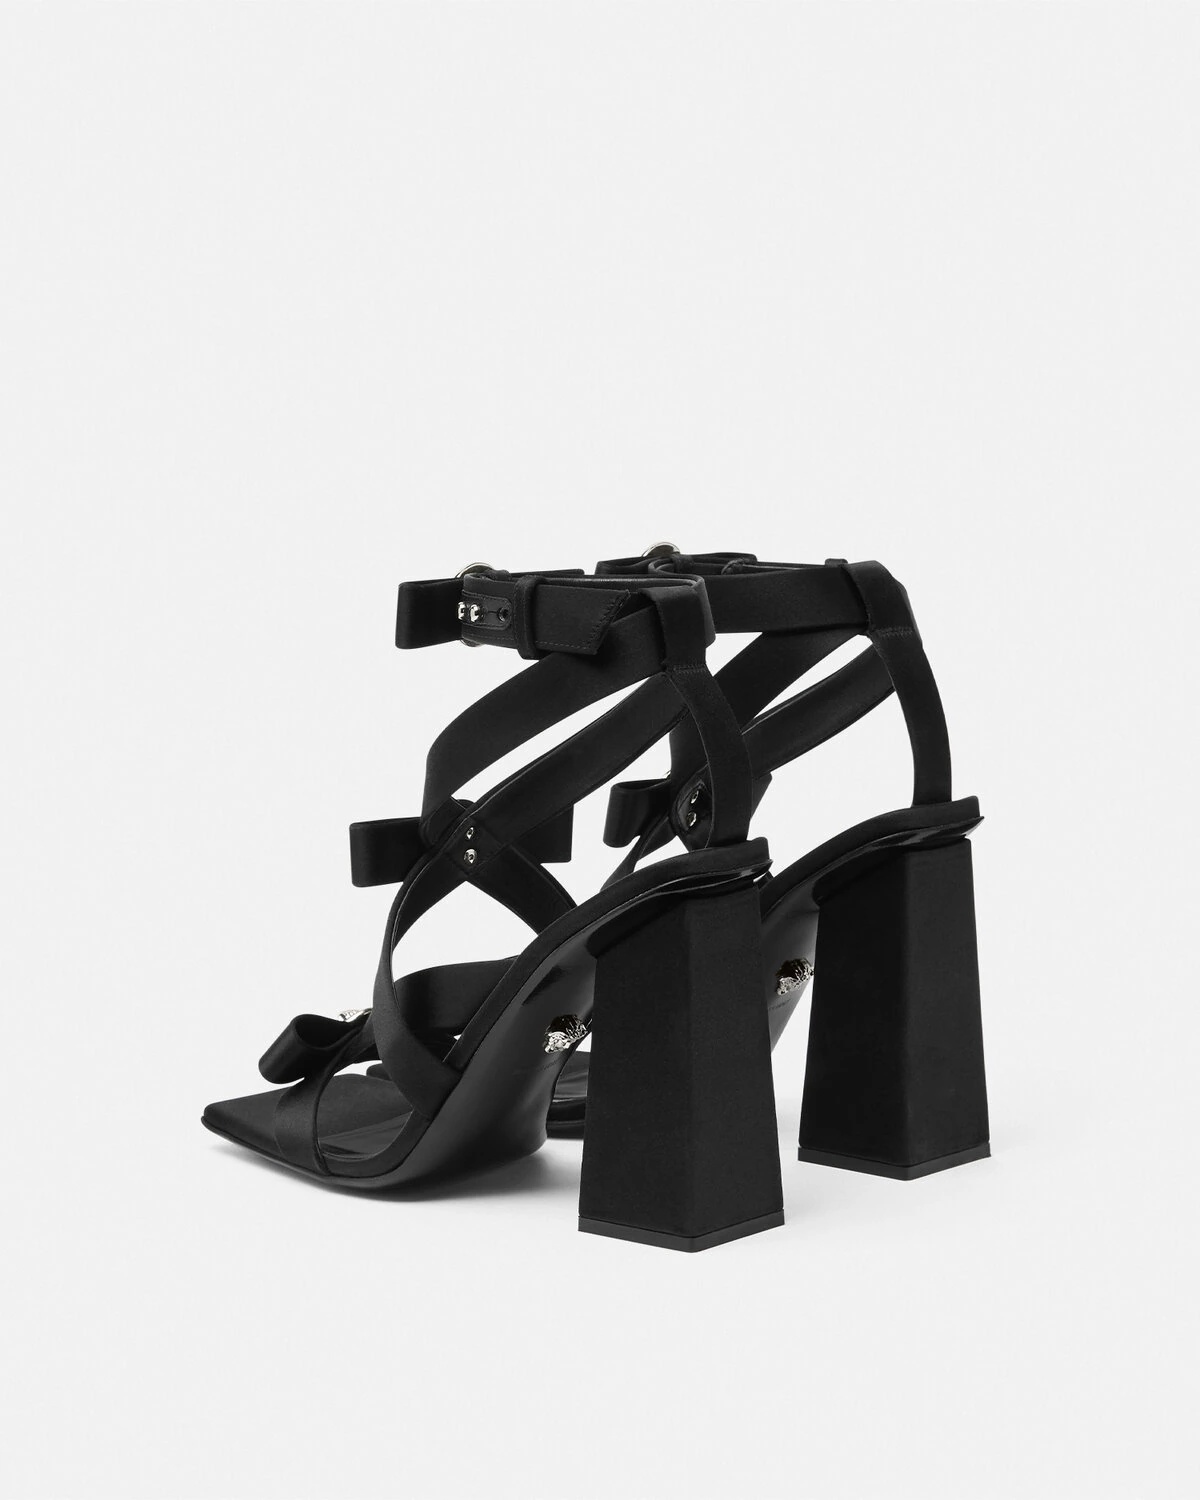 Gianni Ribbon Satin Cage Sandals 105 mm - 4